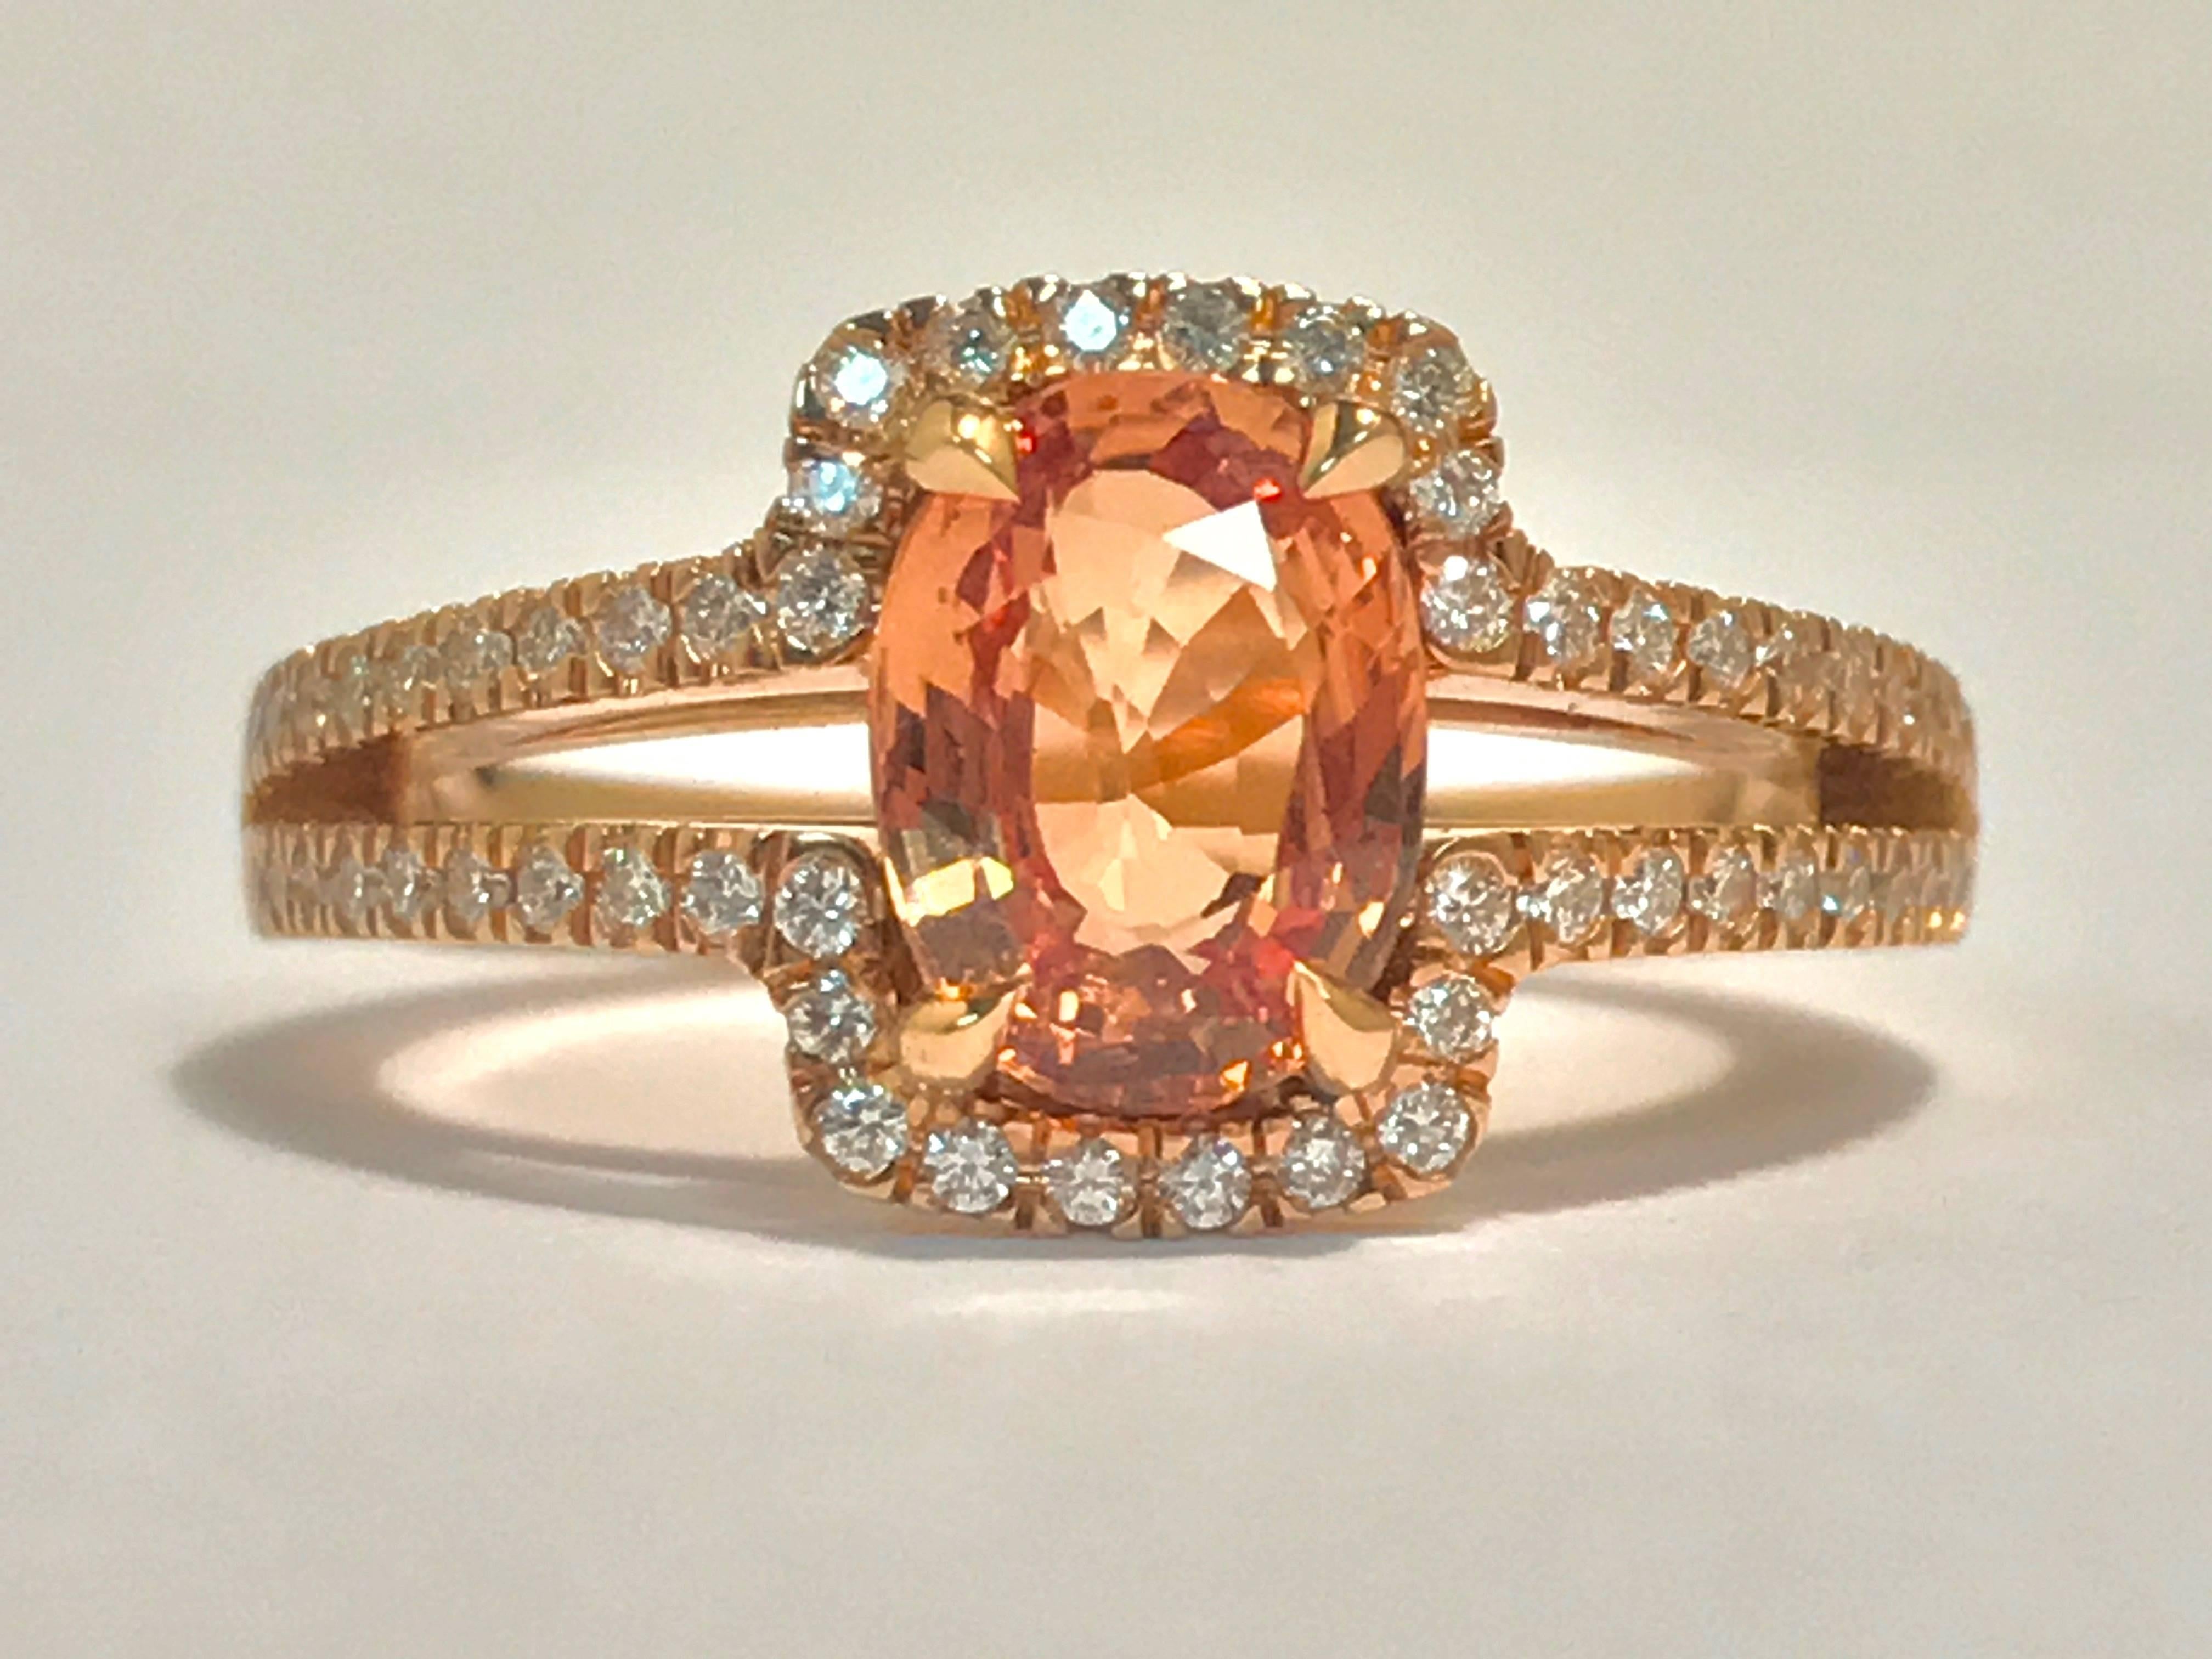 Beautiful and Timeless Orange Sapphire and Diamonds Engagement Ring.
Pink Gold 18 Carat
Sapphire
Diamonds 0,26 Carat Form Brillants Color F/G 
Size : 52,5